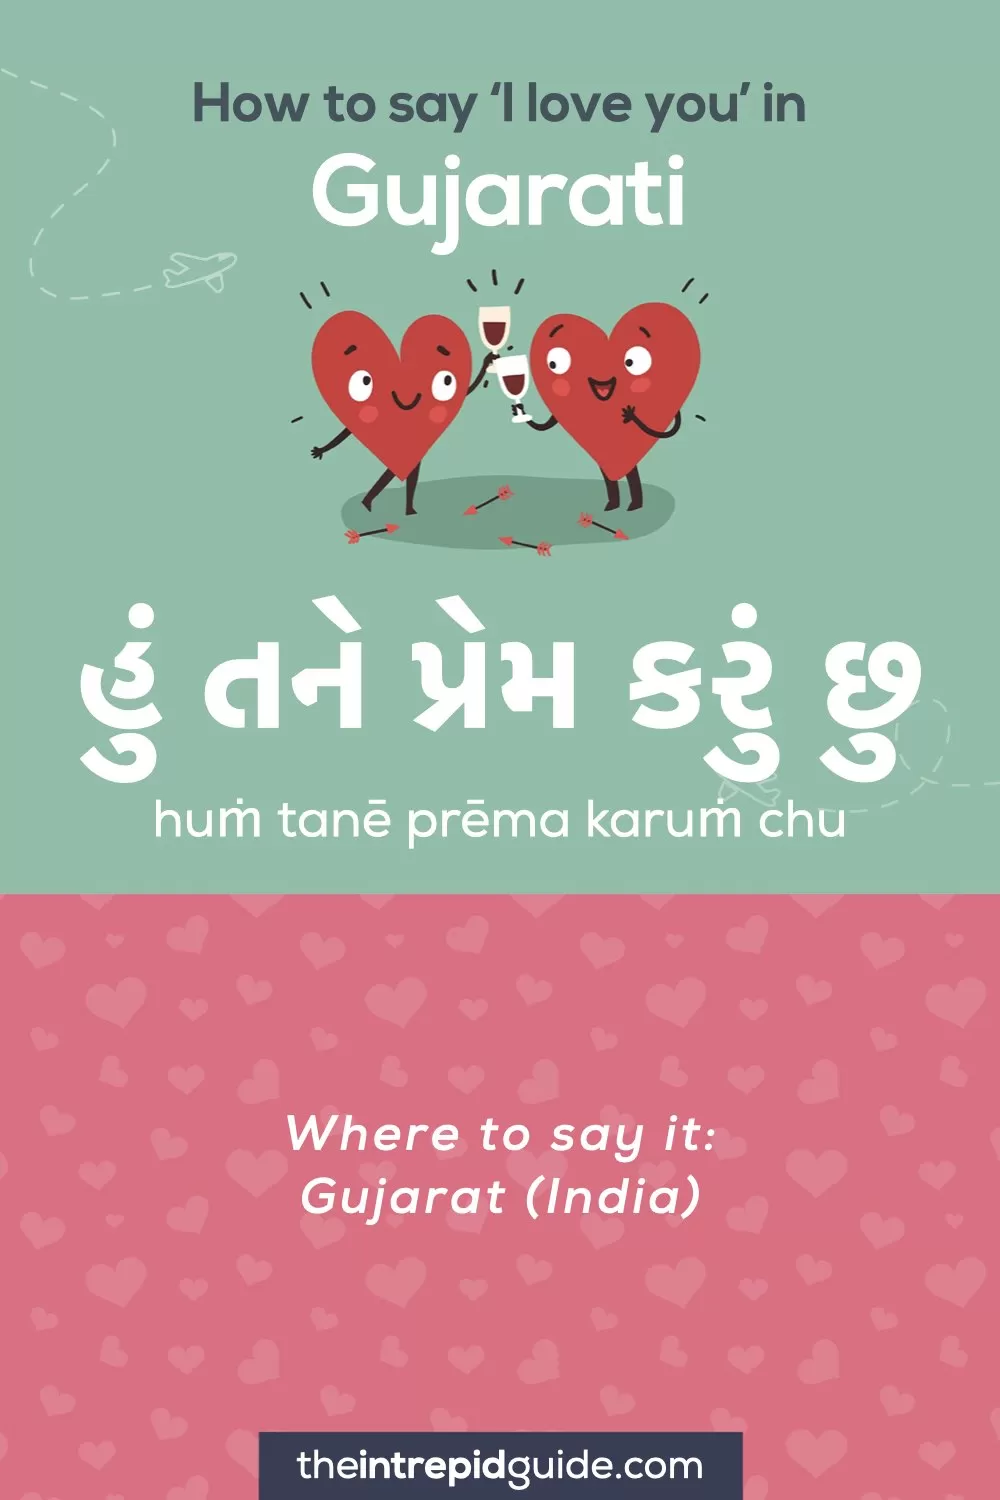 How to say I love you in different languages - Gujarati - હું તને પ્રેમ કરું છુ